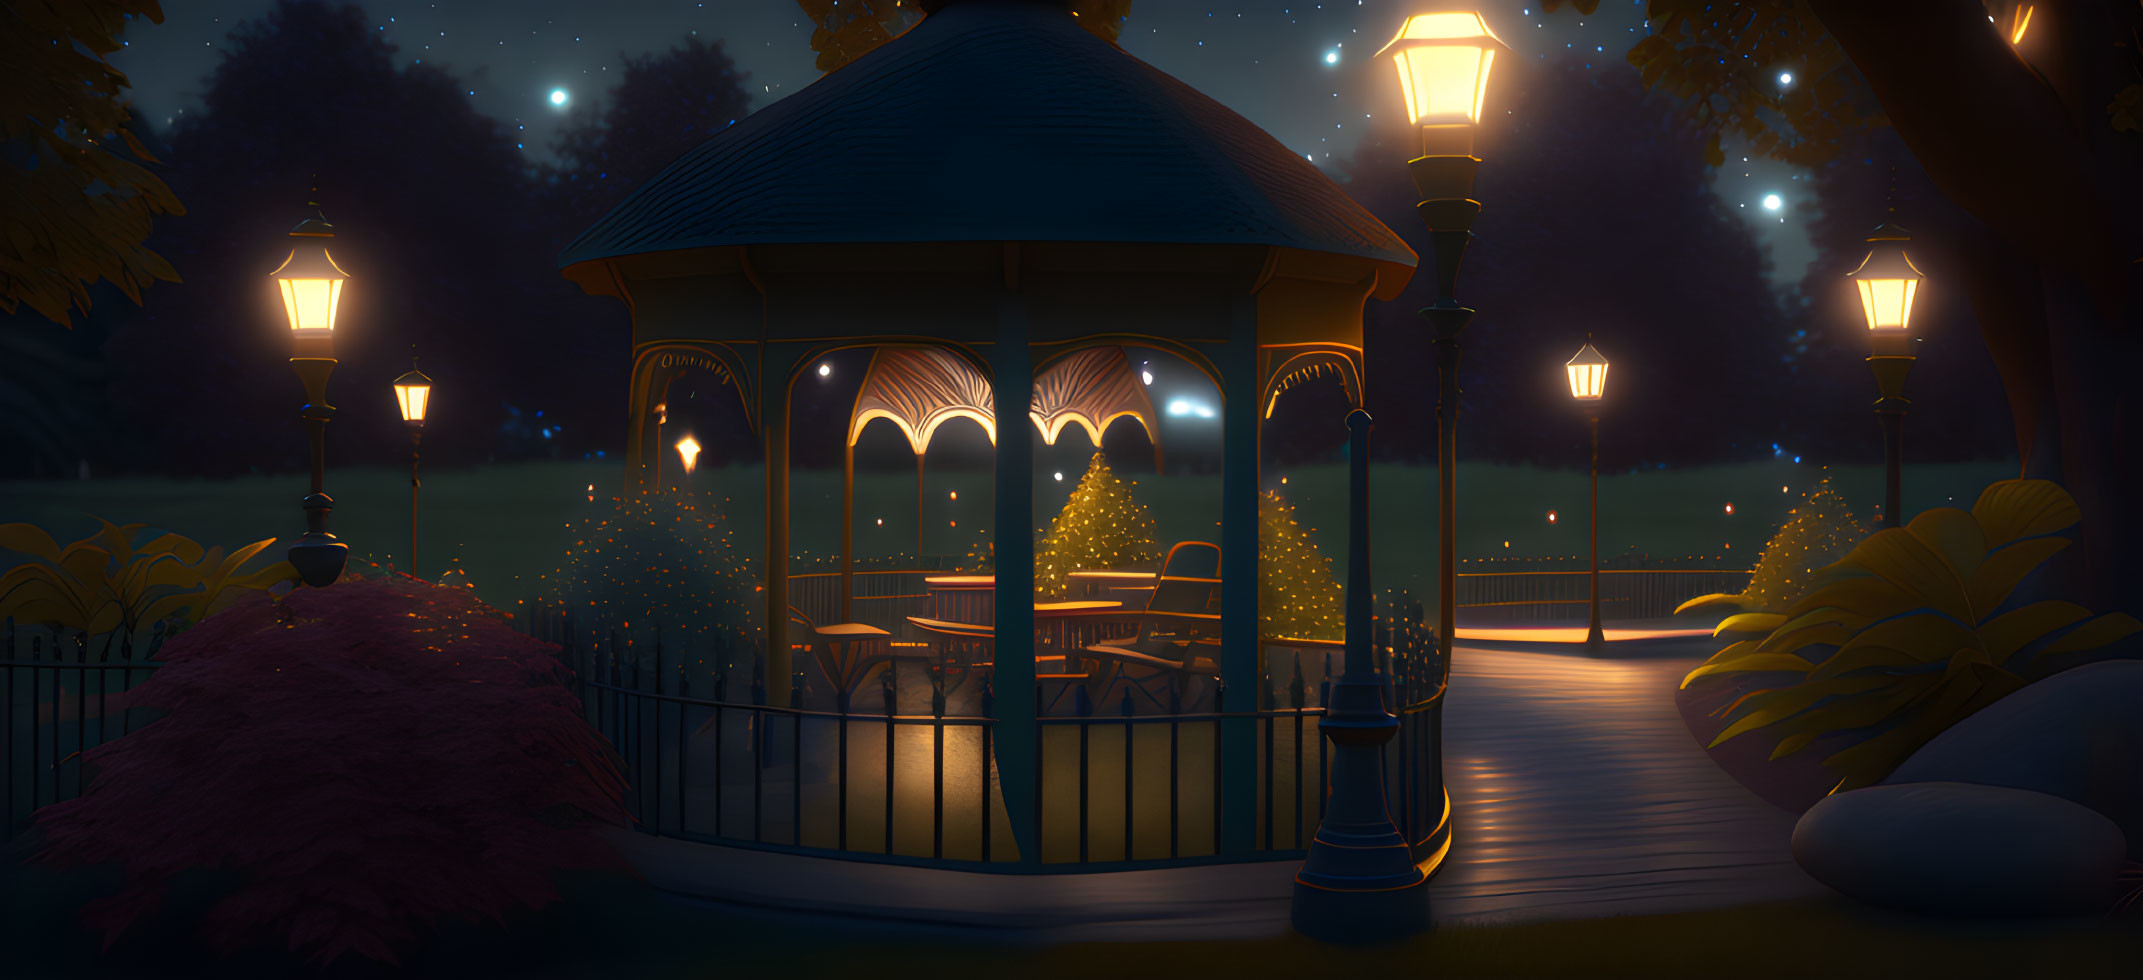 Tranquil night scene with lit gazebo and glowing street lamps